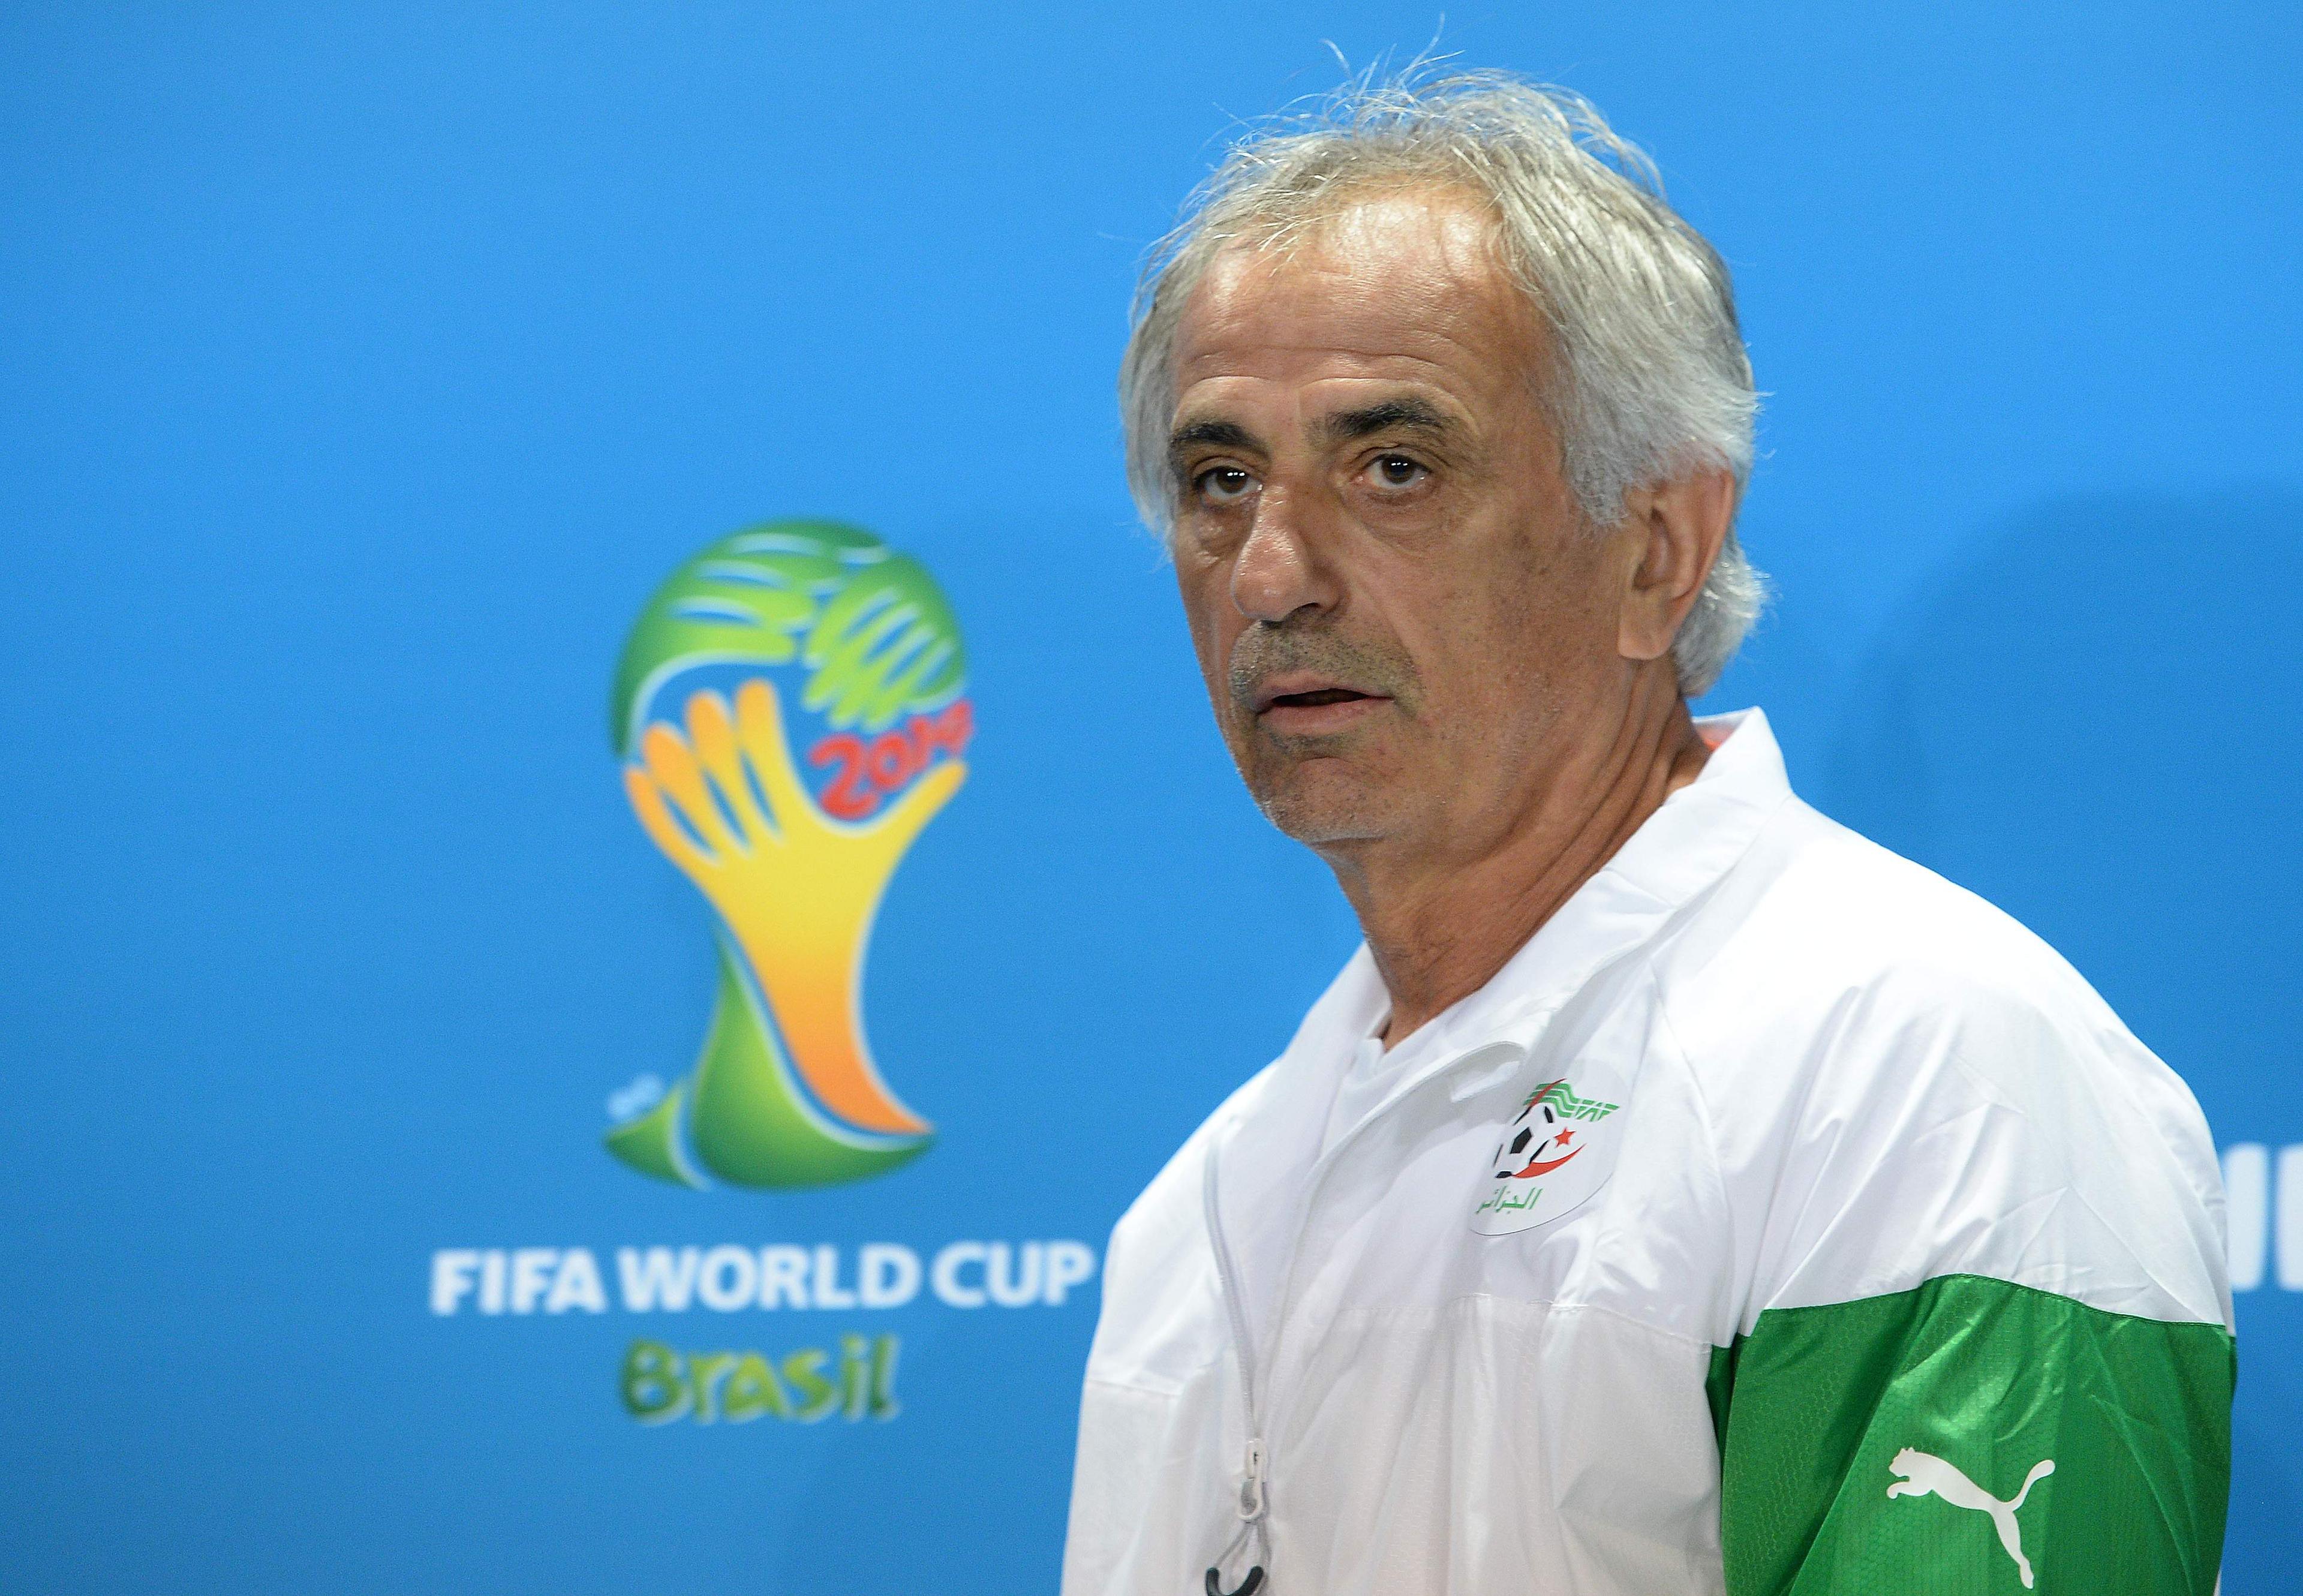 Vahid Halilhodžić: When I watch matches of our national team, it seems to me that there is no joy, no sharpness, no charge